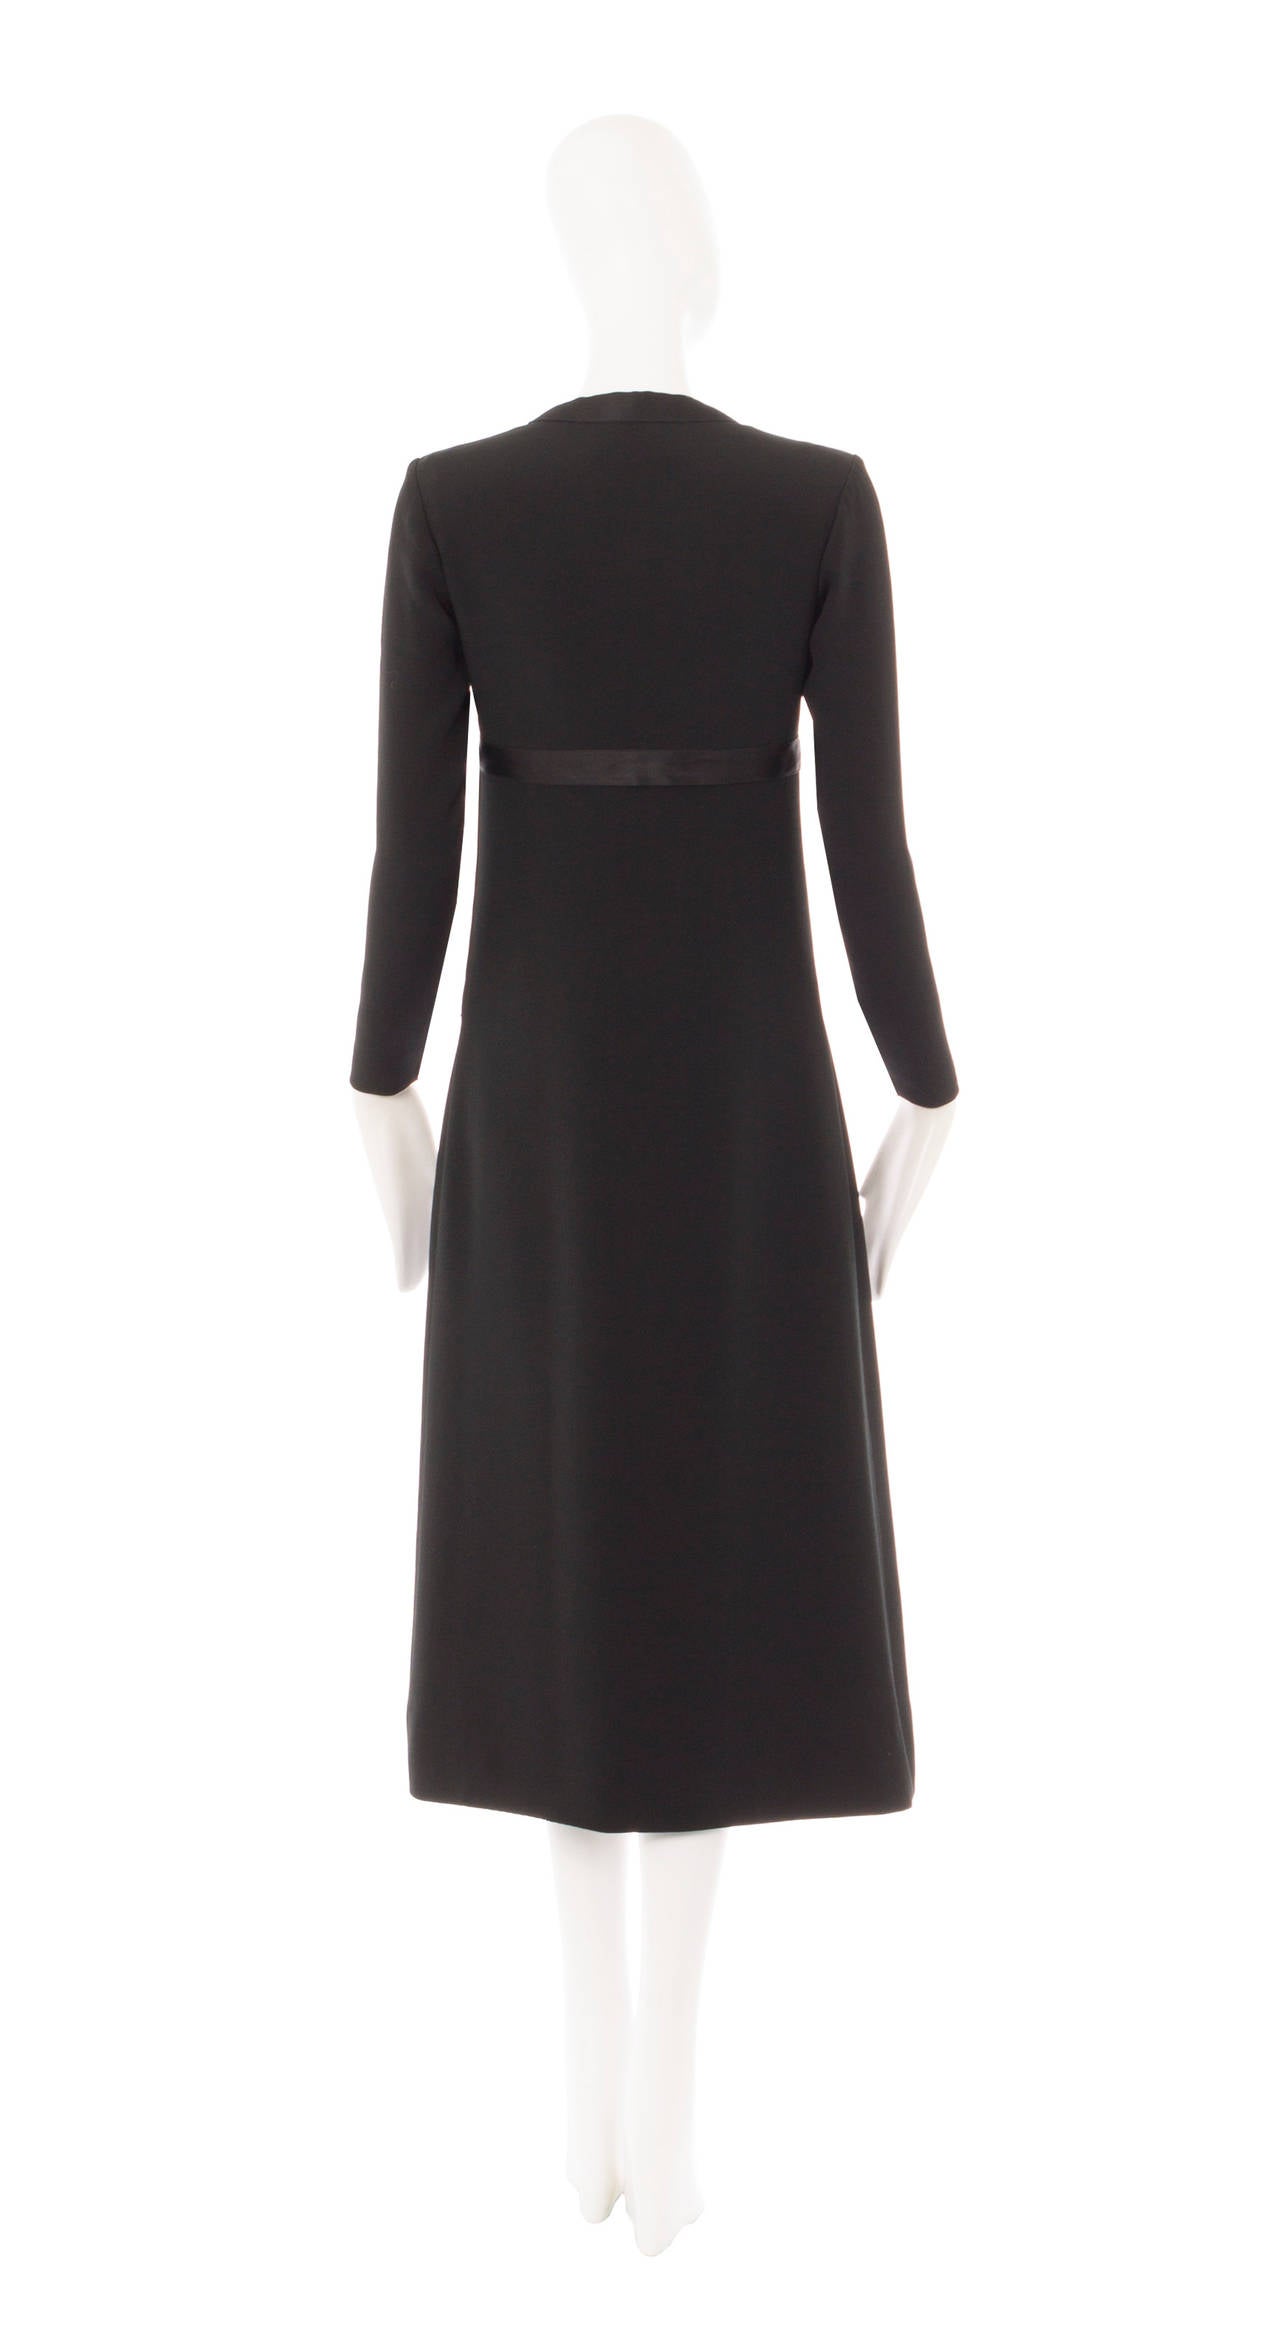 An Yves Saint Laurent Haute Couture Dress, Circa 1970 In Excellent Condition For Sale In London, GB